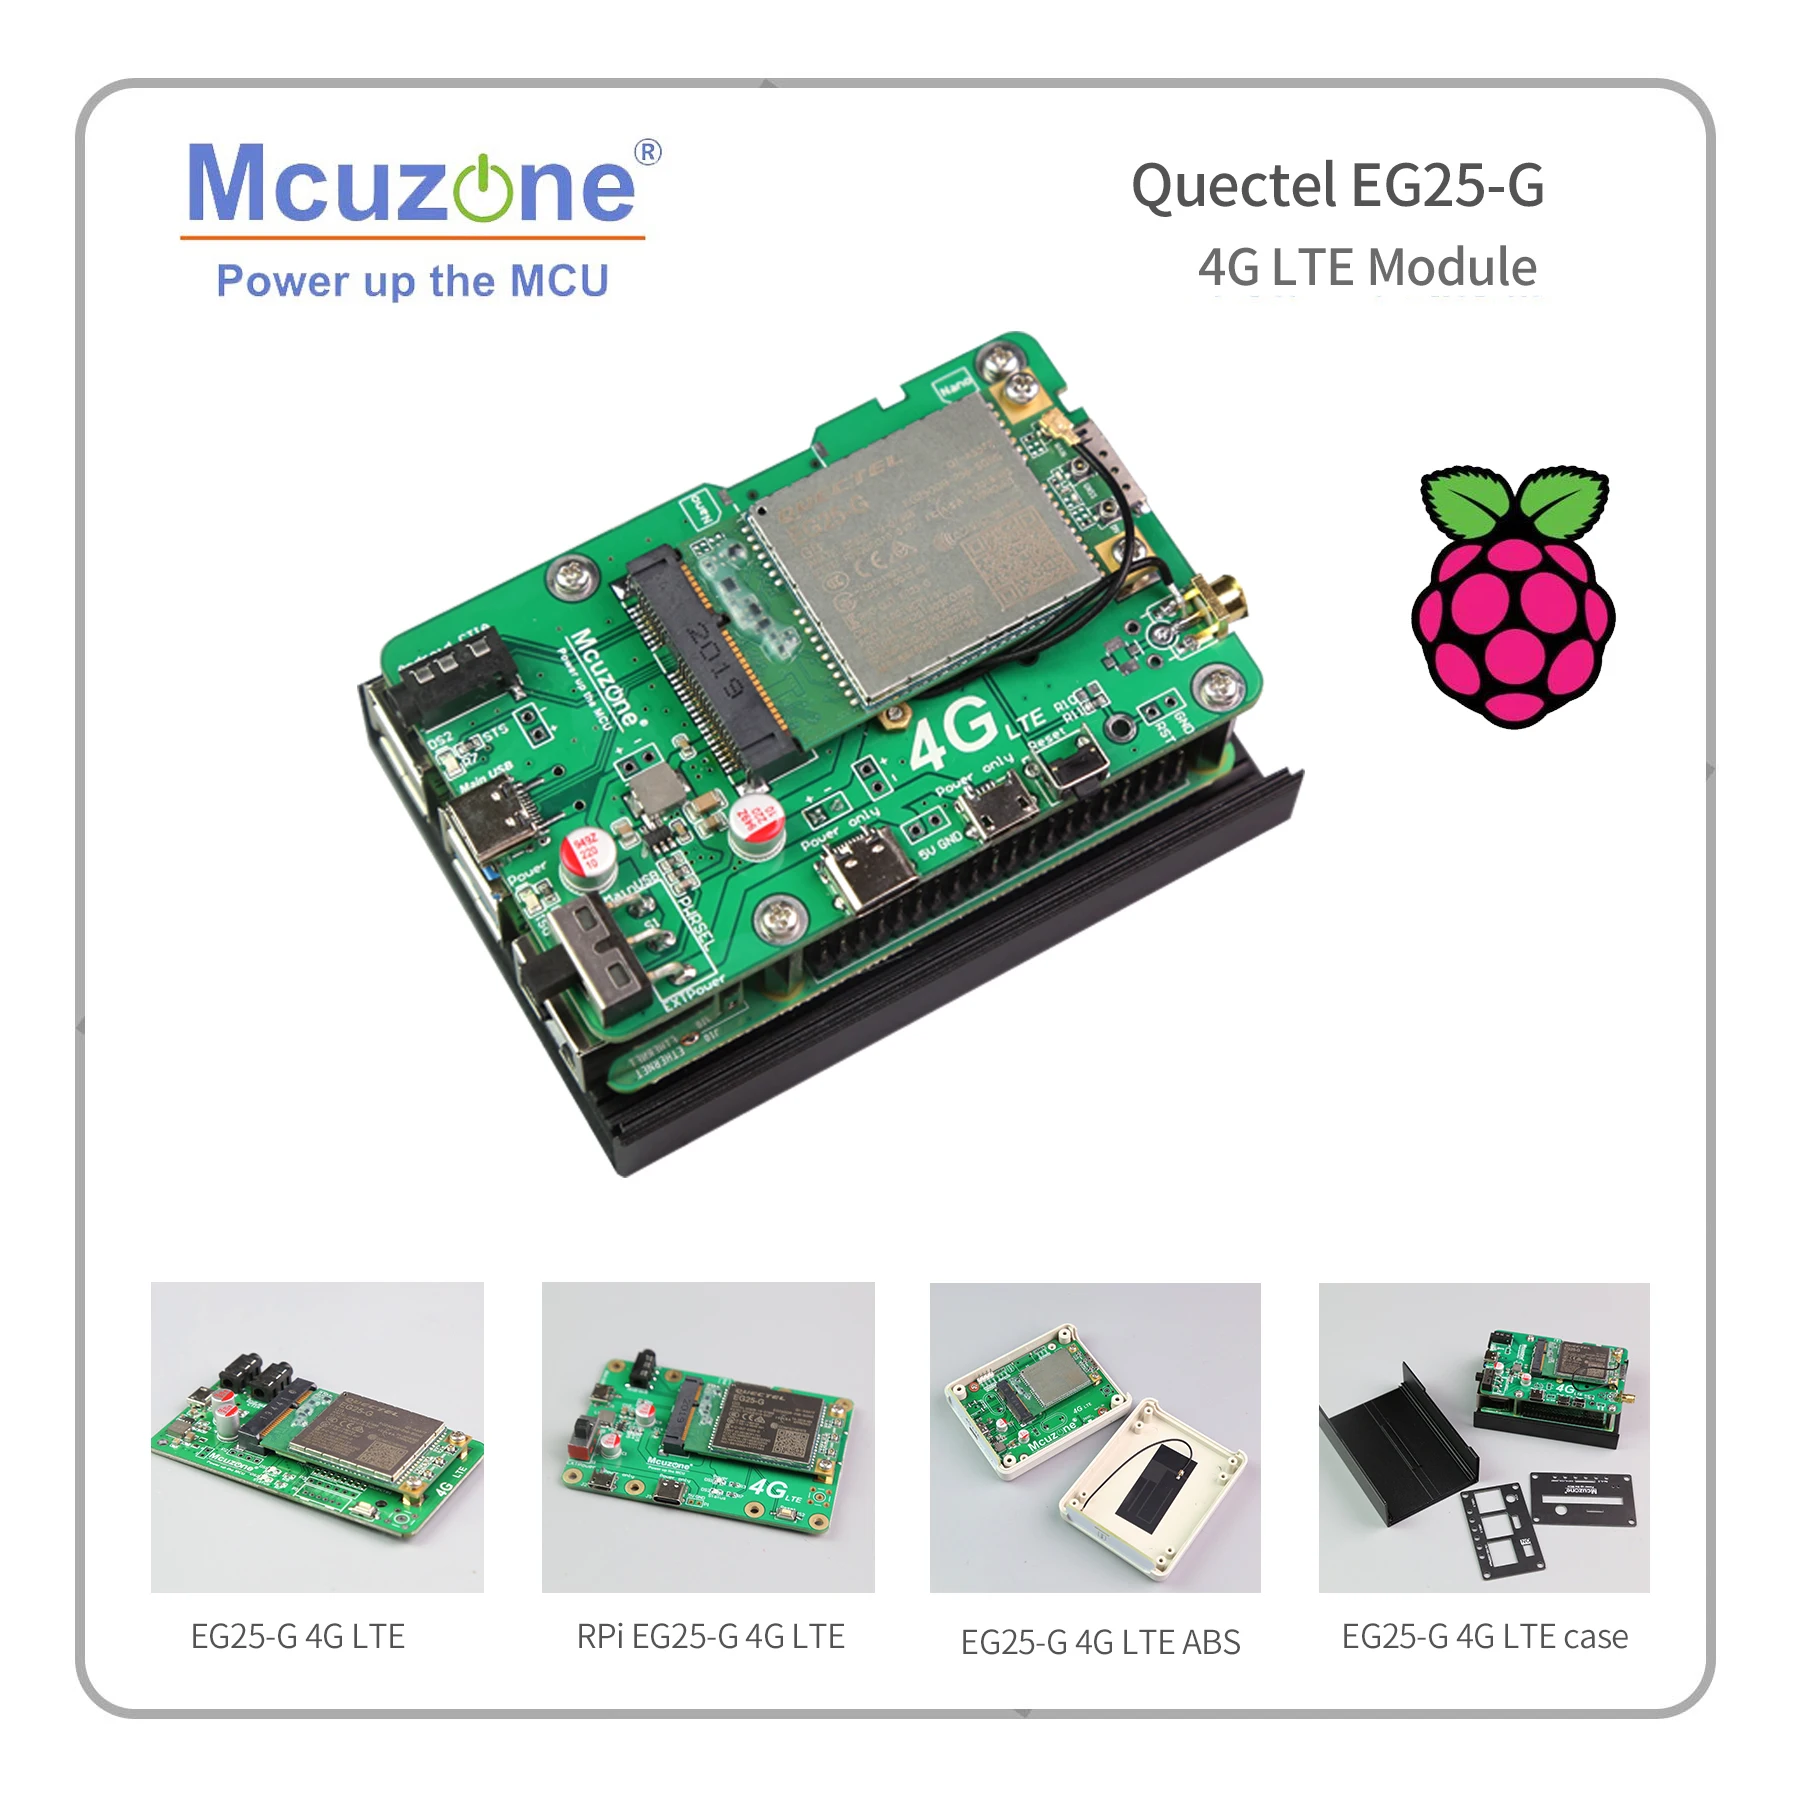 Quectel EG25-G Global BAND 4G LTE WCDMA GSM GPRS, for Raspberry Pi Rockchip ARM Android Linux Wince Windows  Quectel EG25